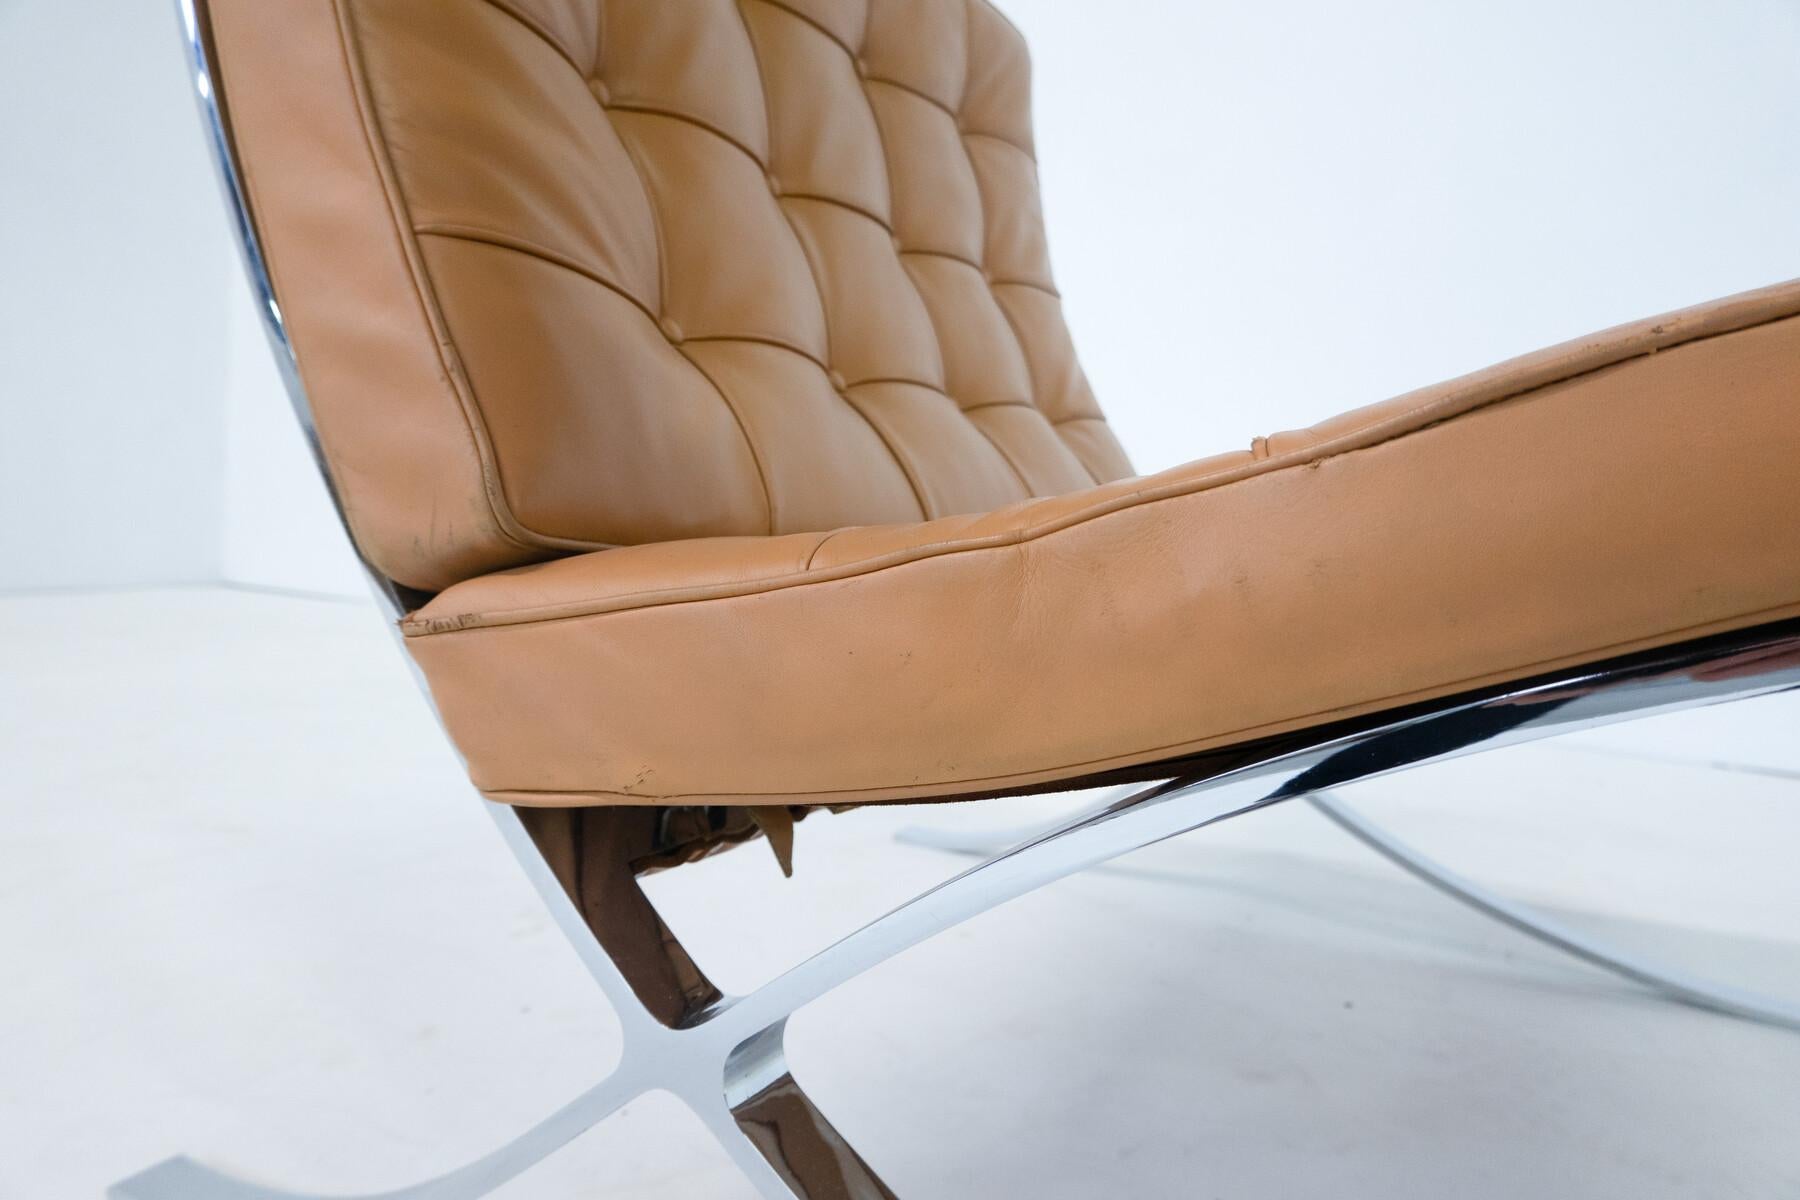 Mid-20th Century Pair of Cognac Leather Barcelona Chairs by Mies Van Der Rohe for Knoll, 1960s For Sale